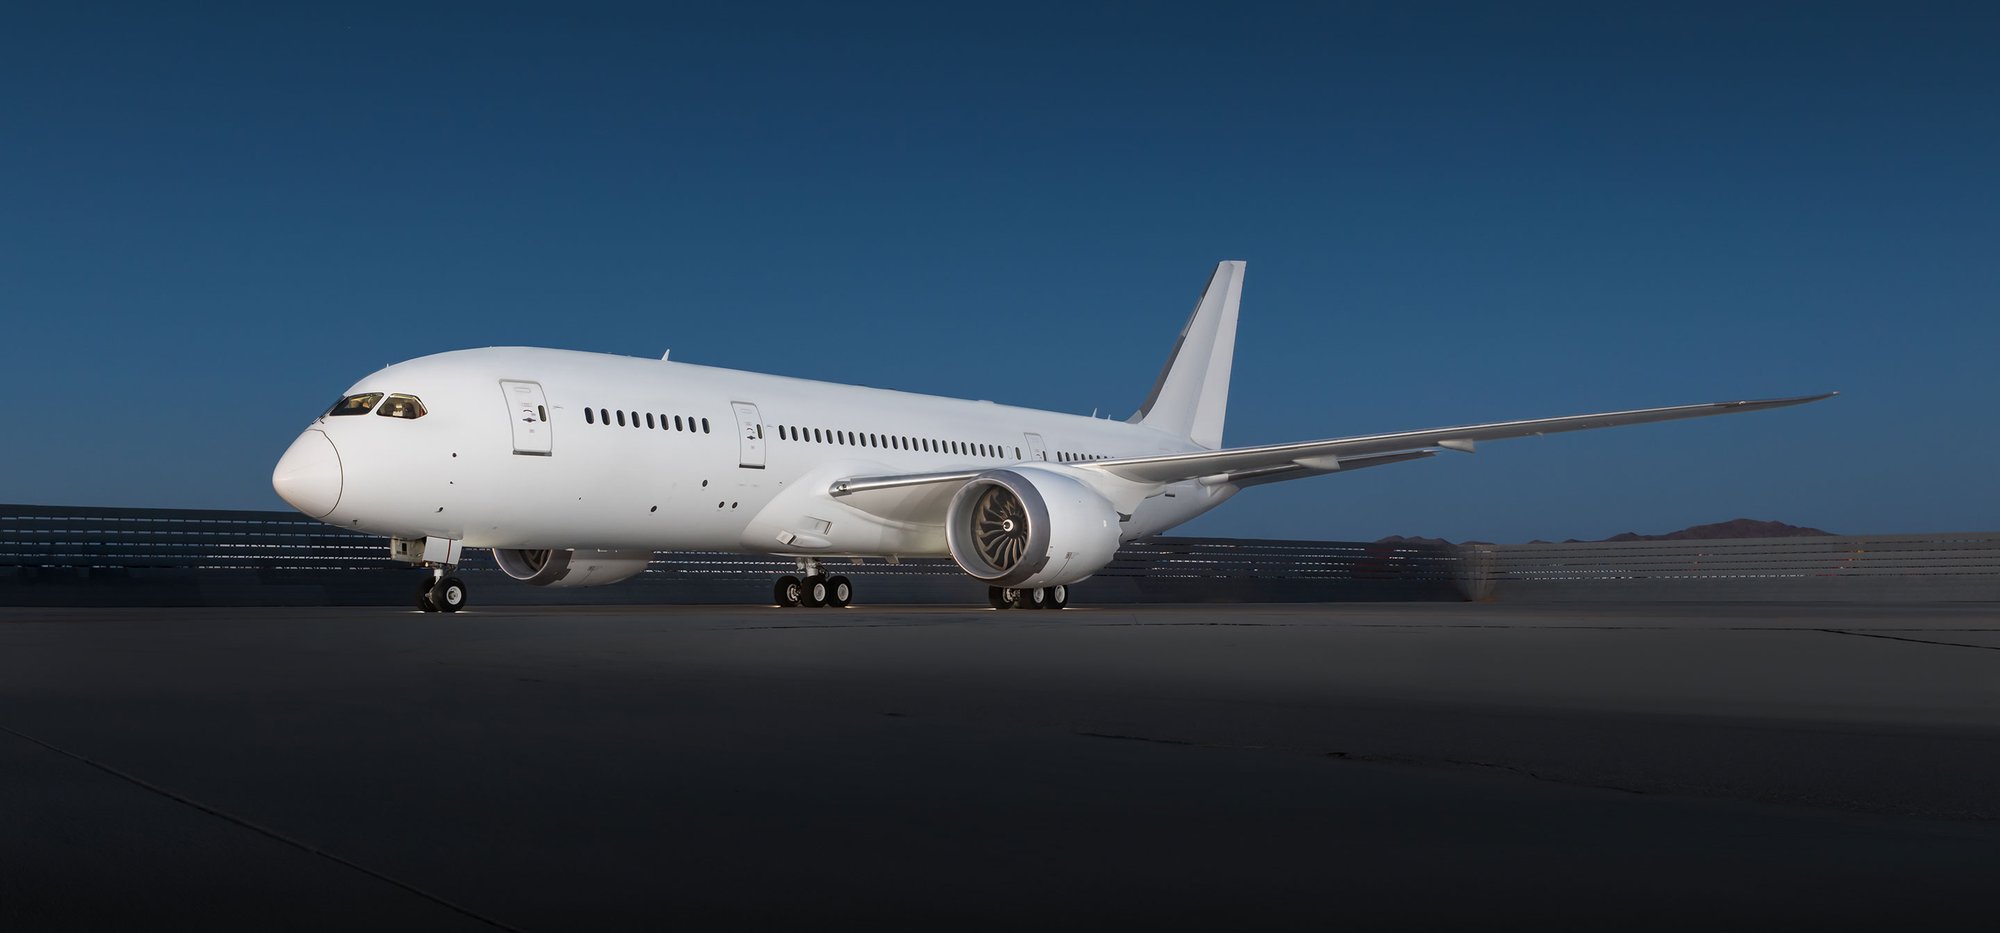 Boeing 787 aircraft on the runway